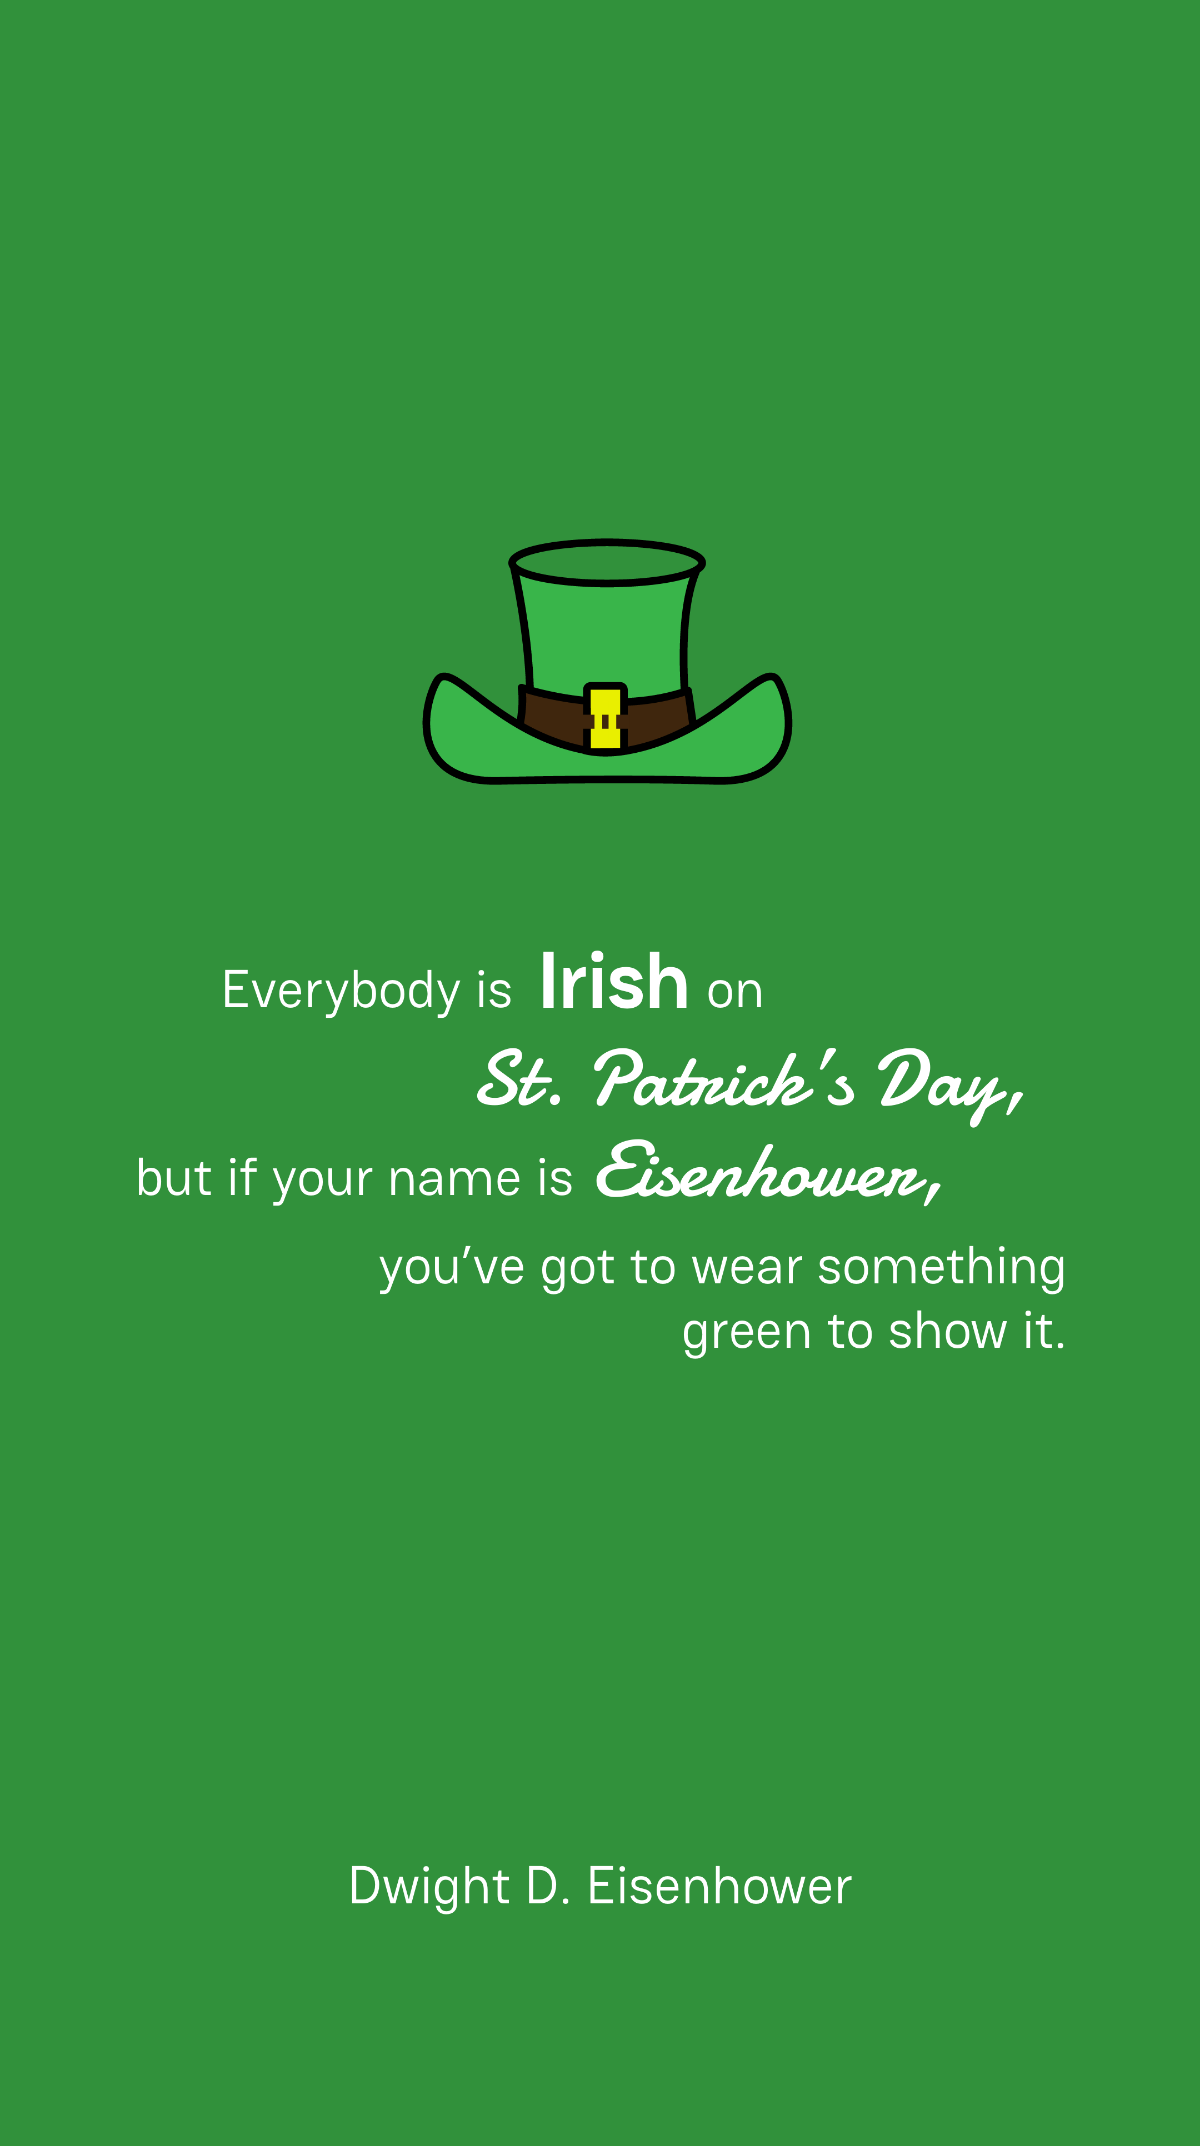 Free Dwight D. Eisenhower - Everybody is Irish on St. Patrick’s Day, but if your name is Eisenhower, you’ve got to wear something green to show it. Template